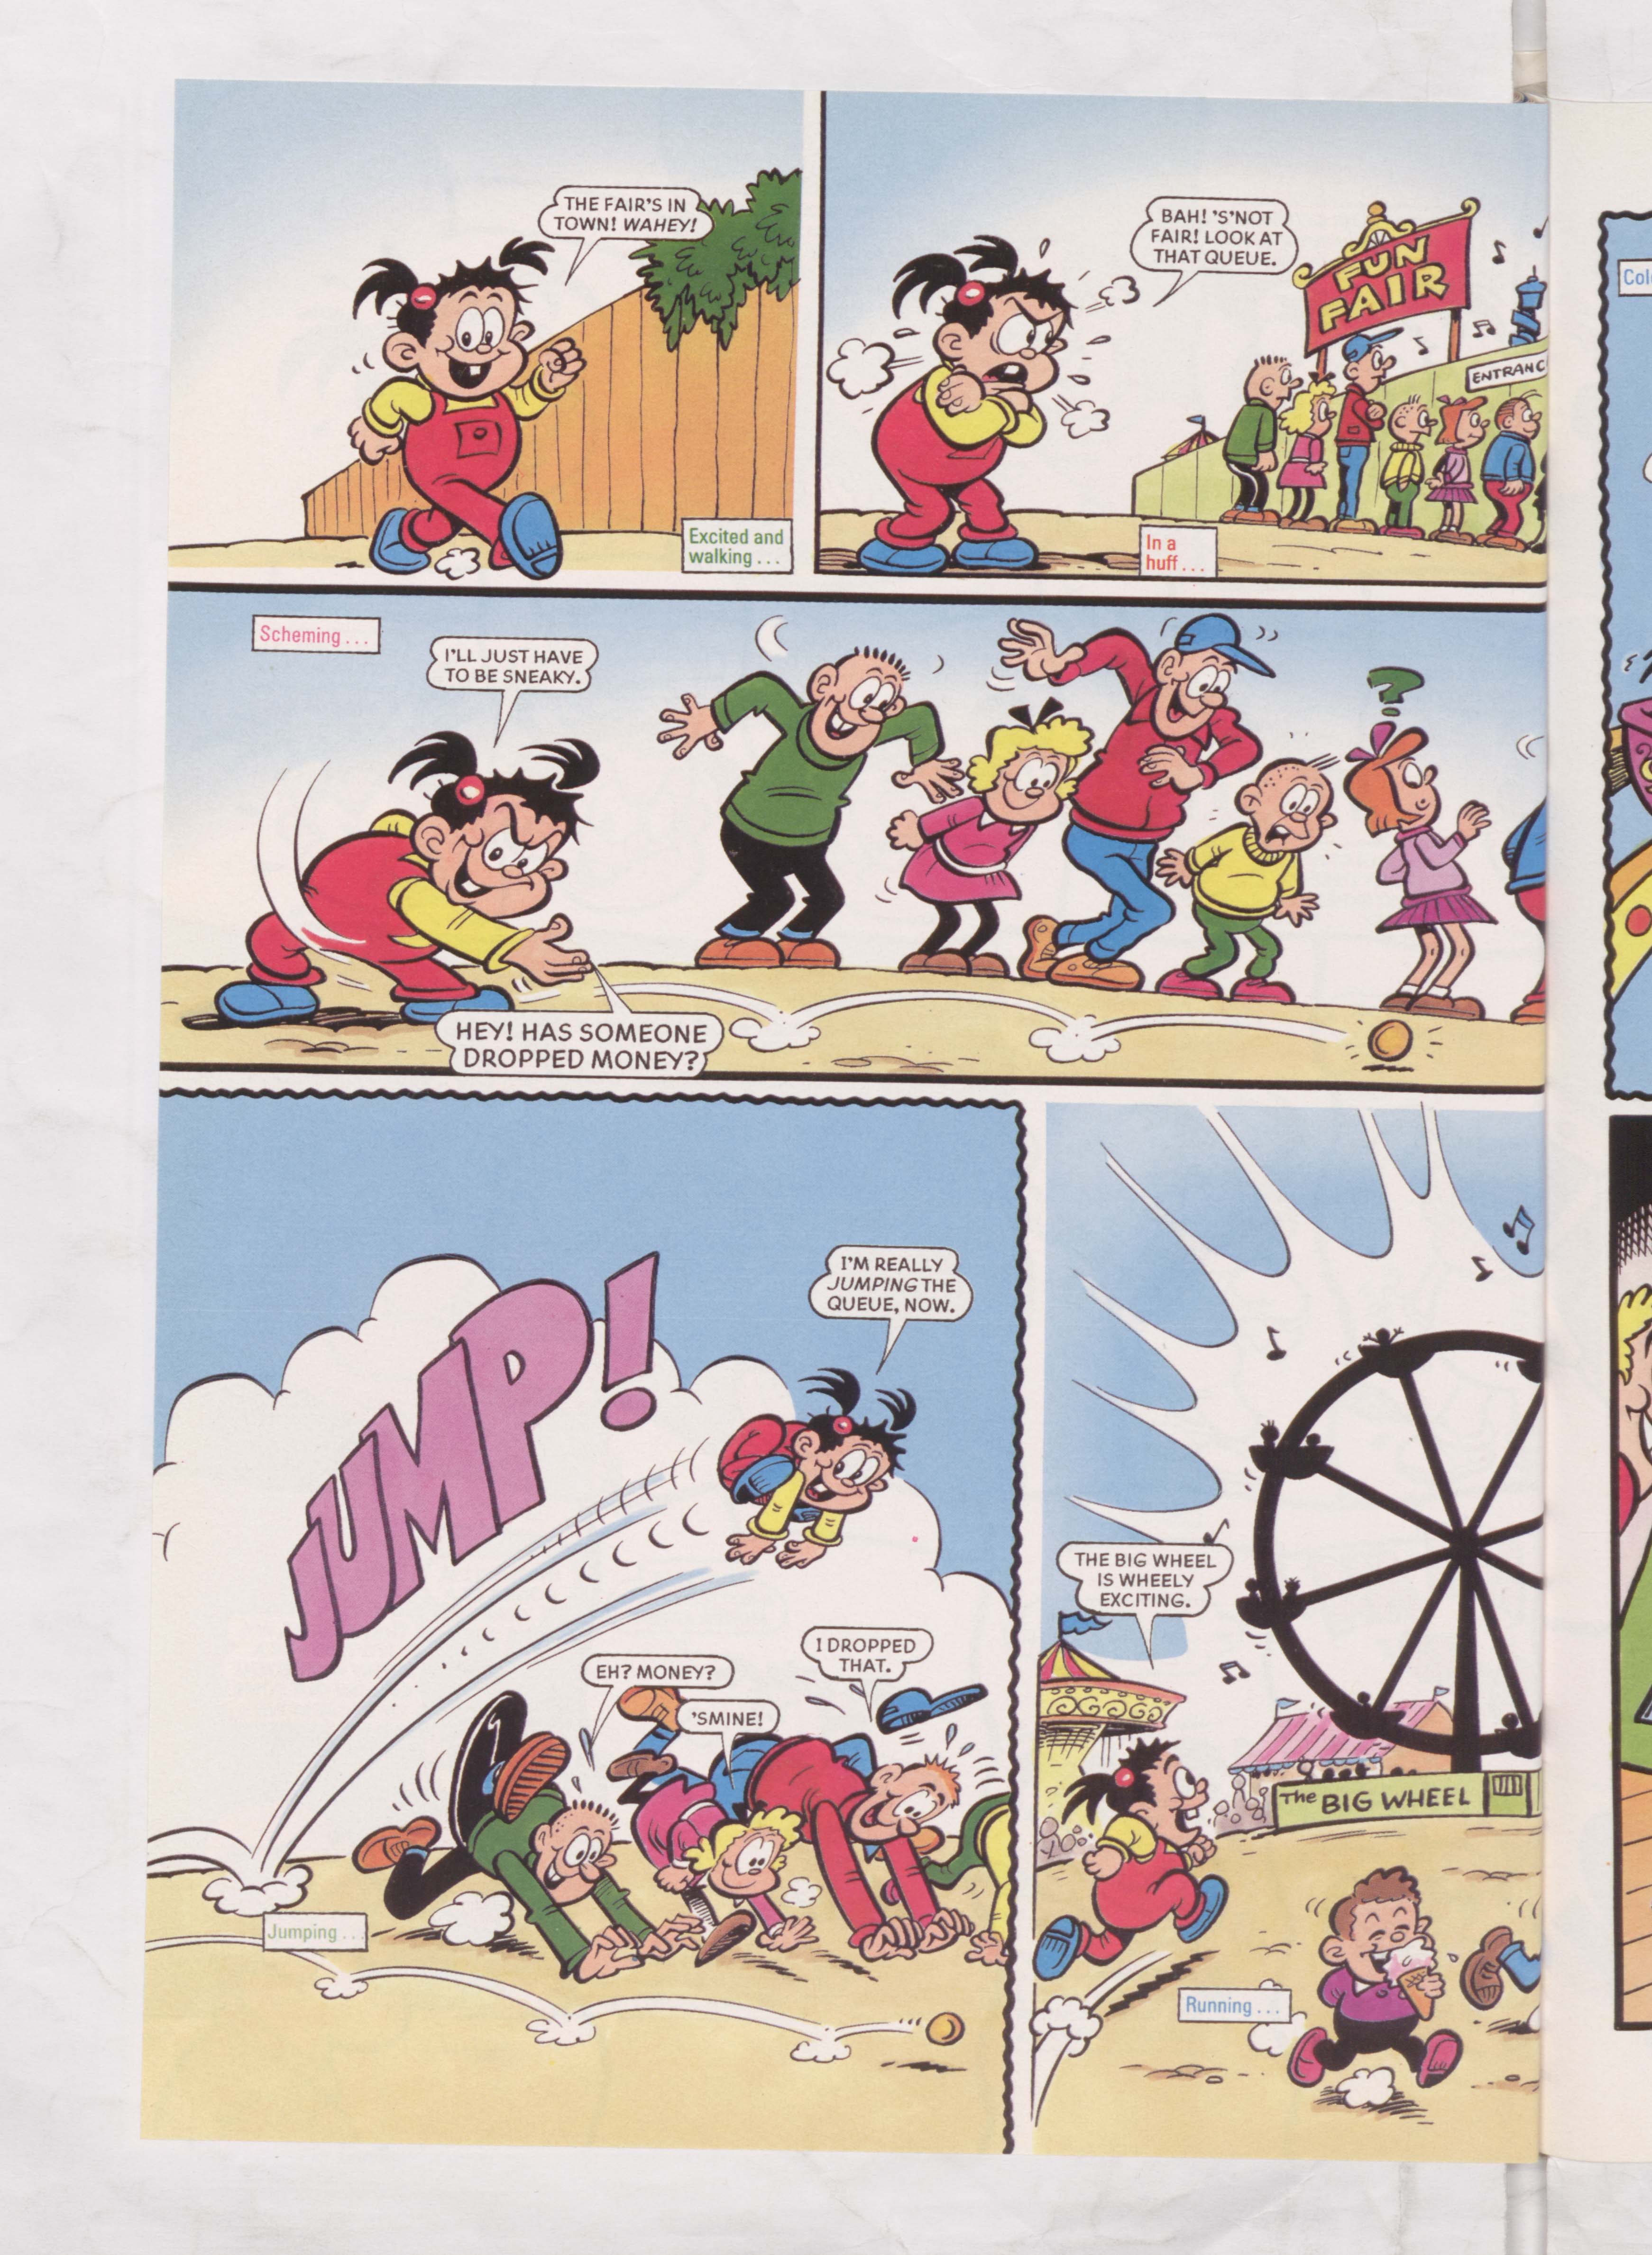 Ivy the Terrible Meets her Maker - Beano Book 2003 Annual